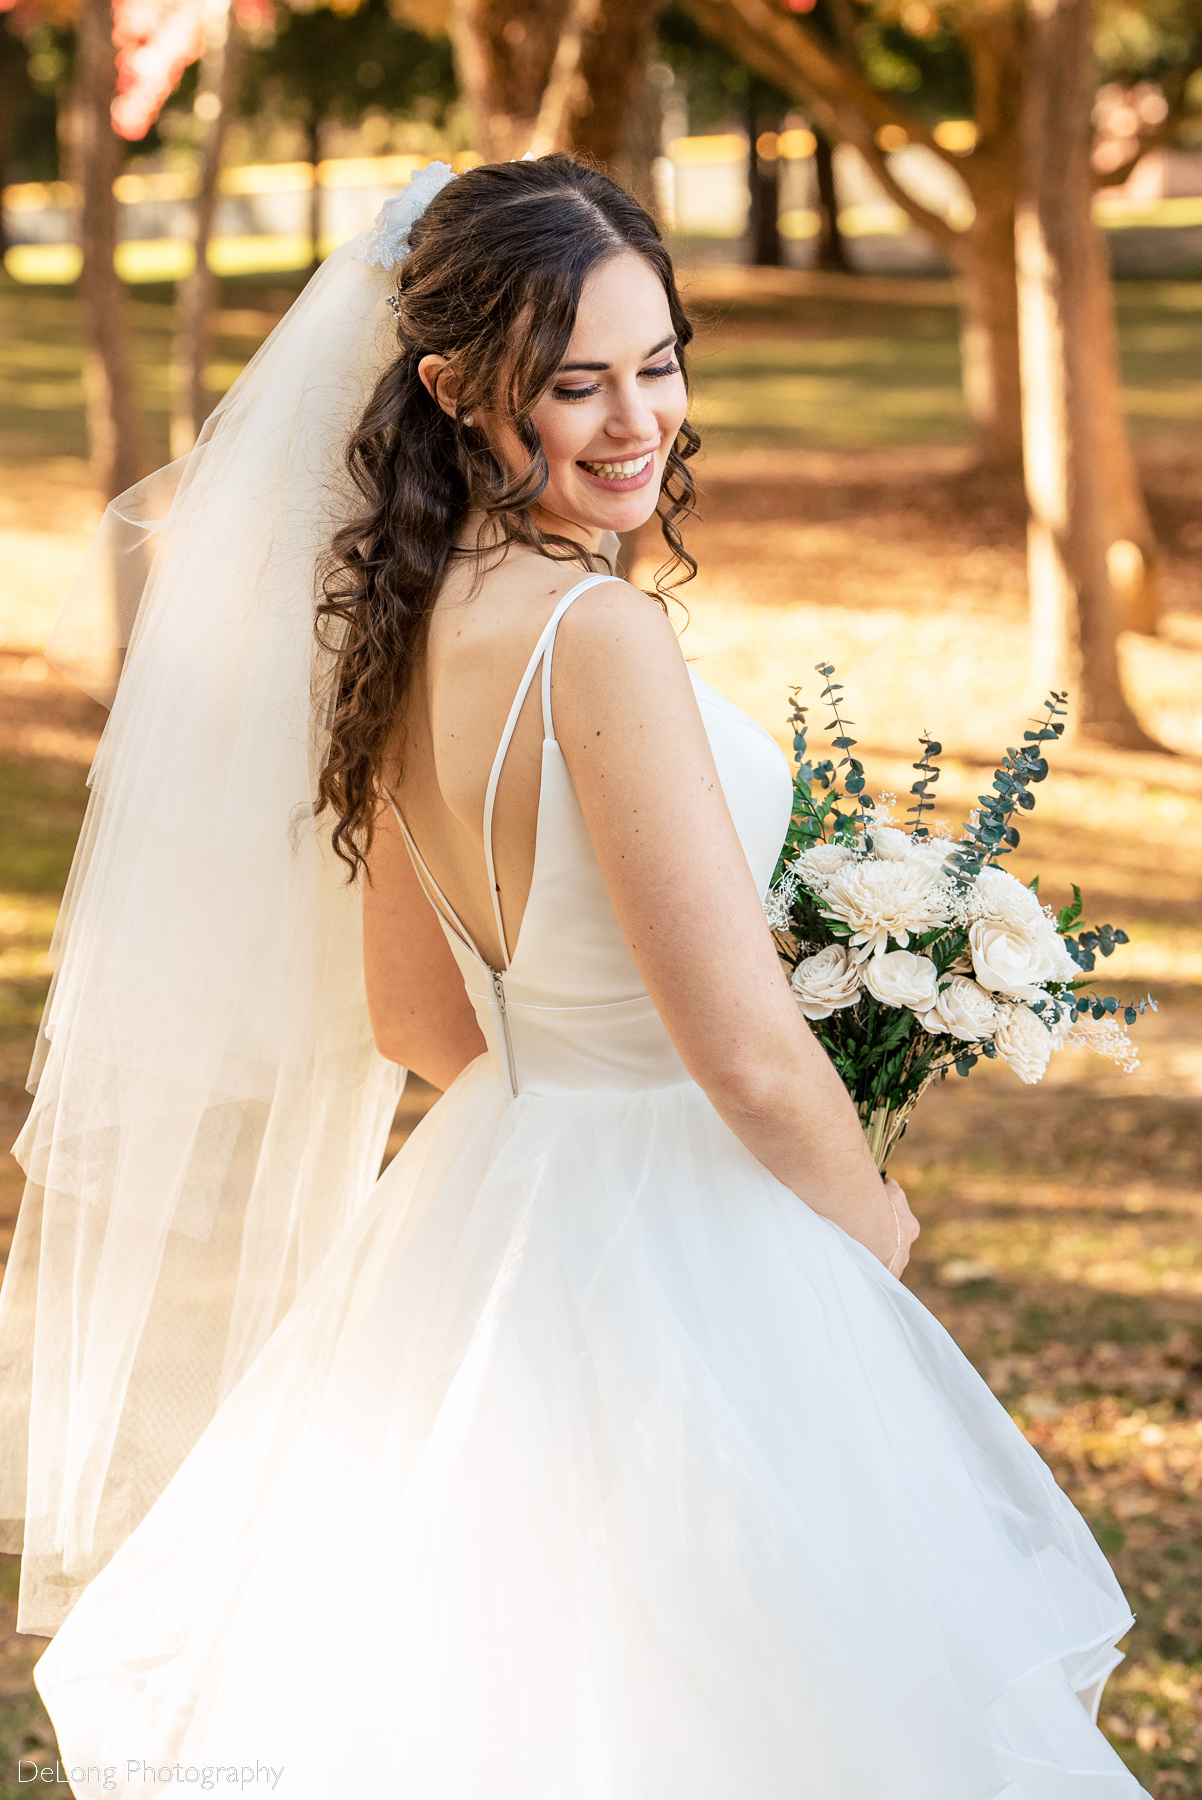 Bridal portrait showing the straps on the back of the dress at Freedom Park by Charlotte wedding photographers DeLong Photography